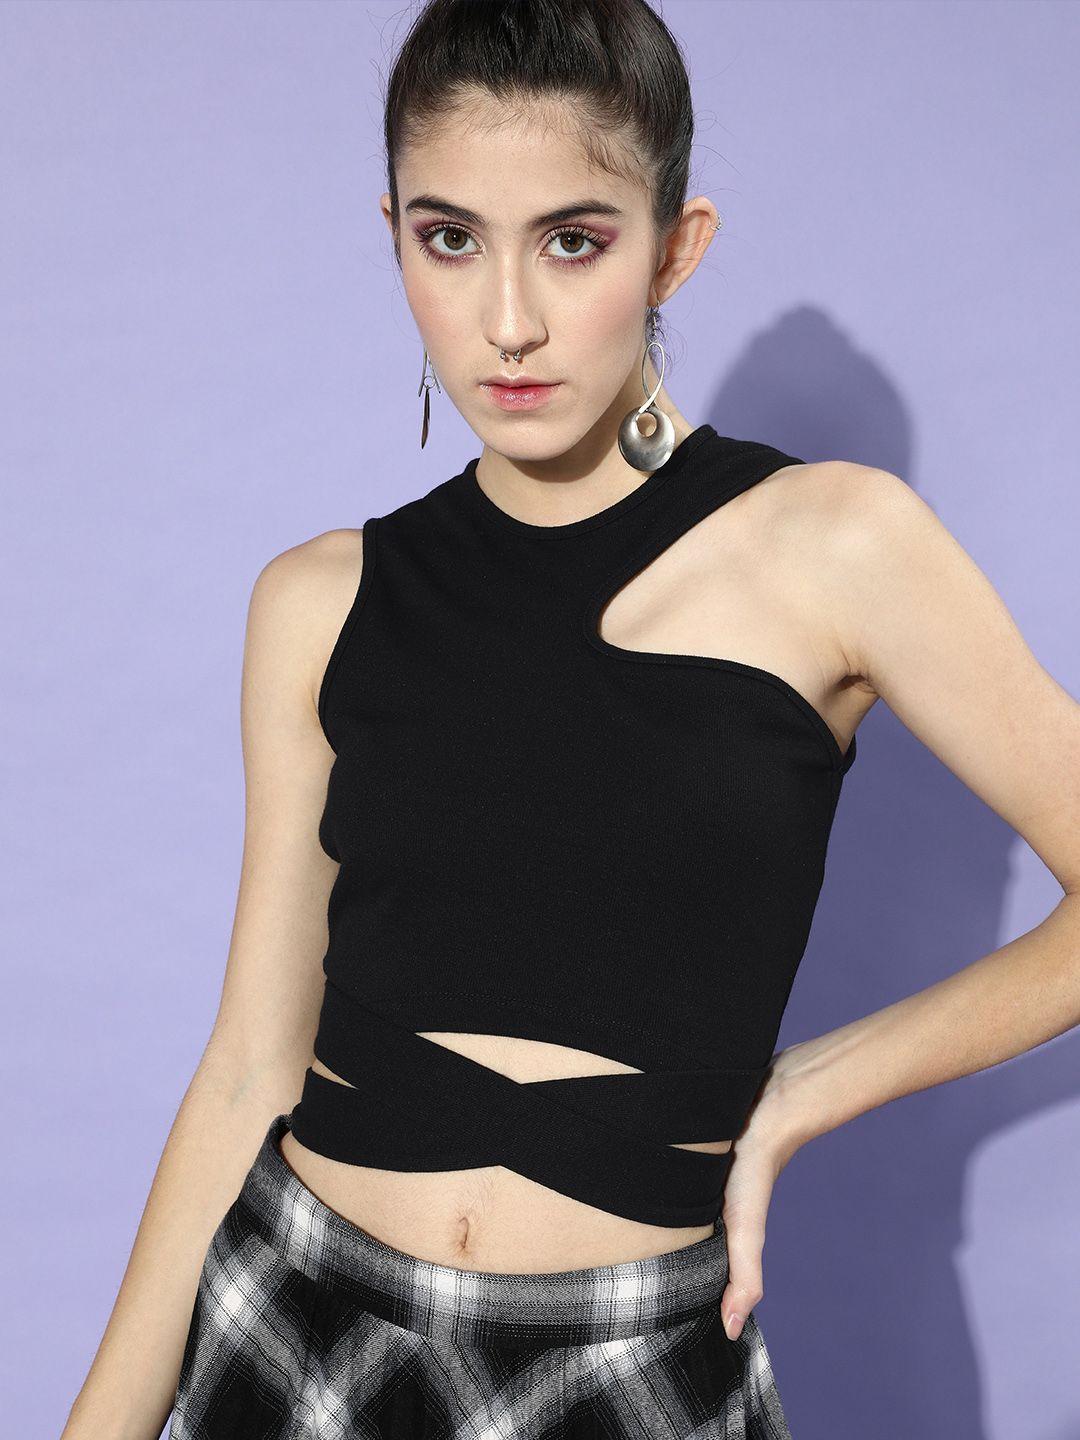 kassually women stylish black solid cropped top